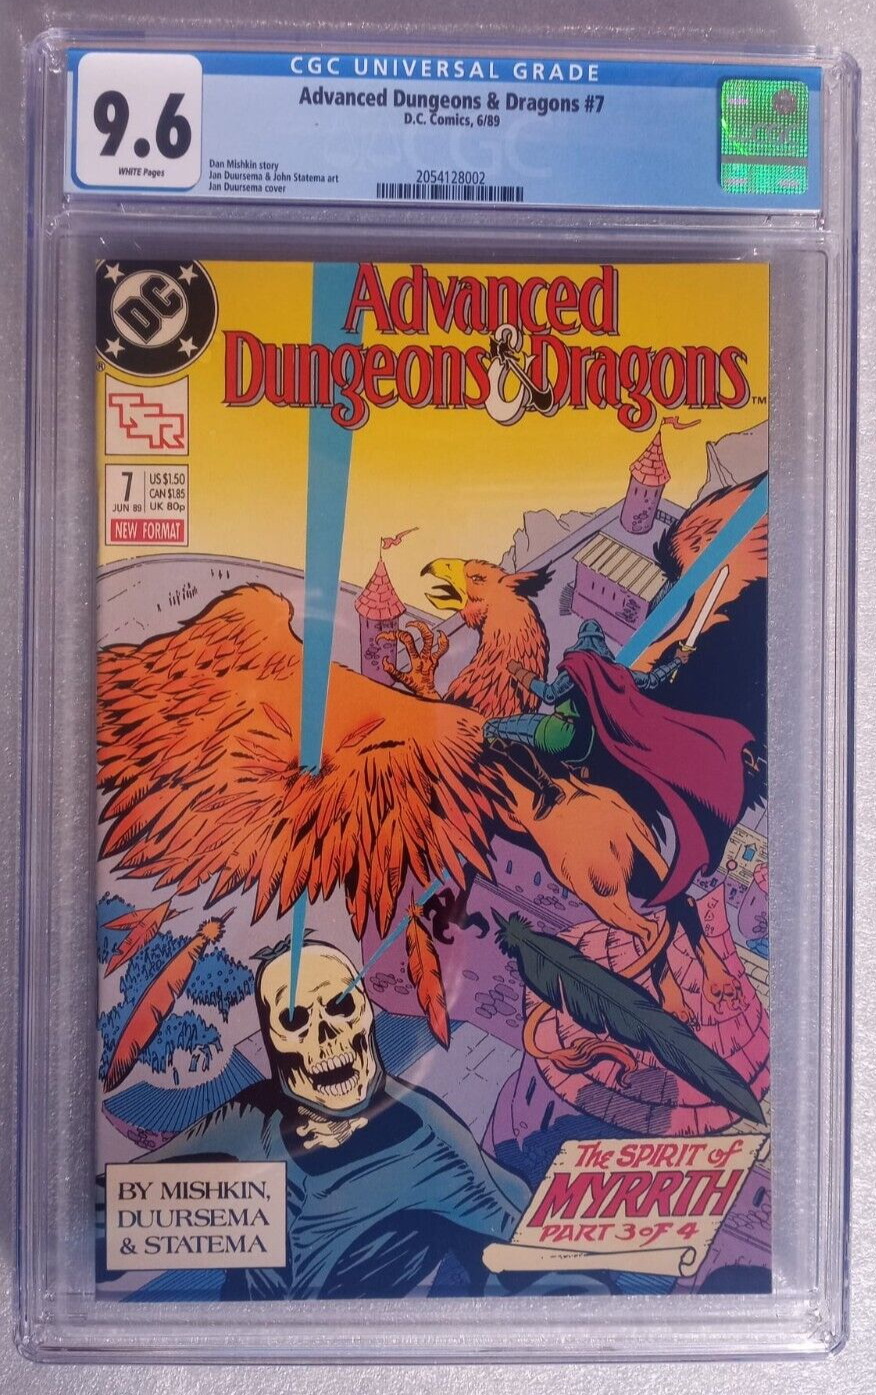 Advanced Dungeons and Dragons #7 CGC 9.6 TSR D&D AD&D